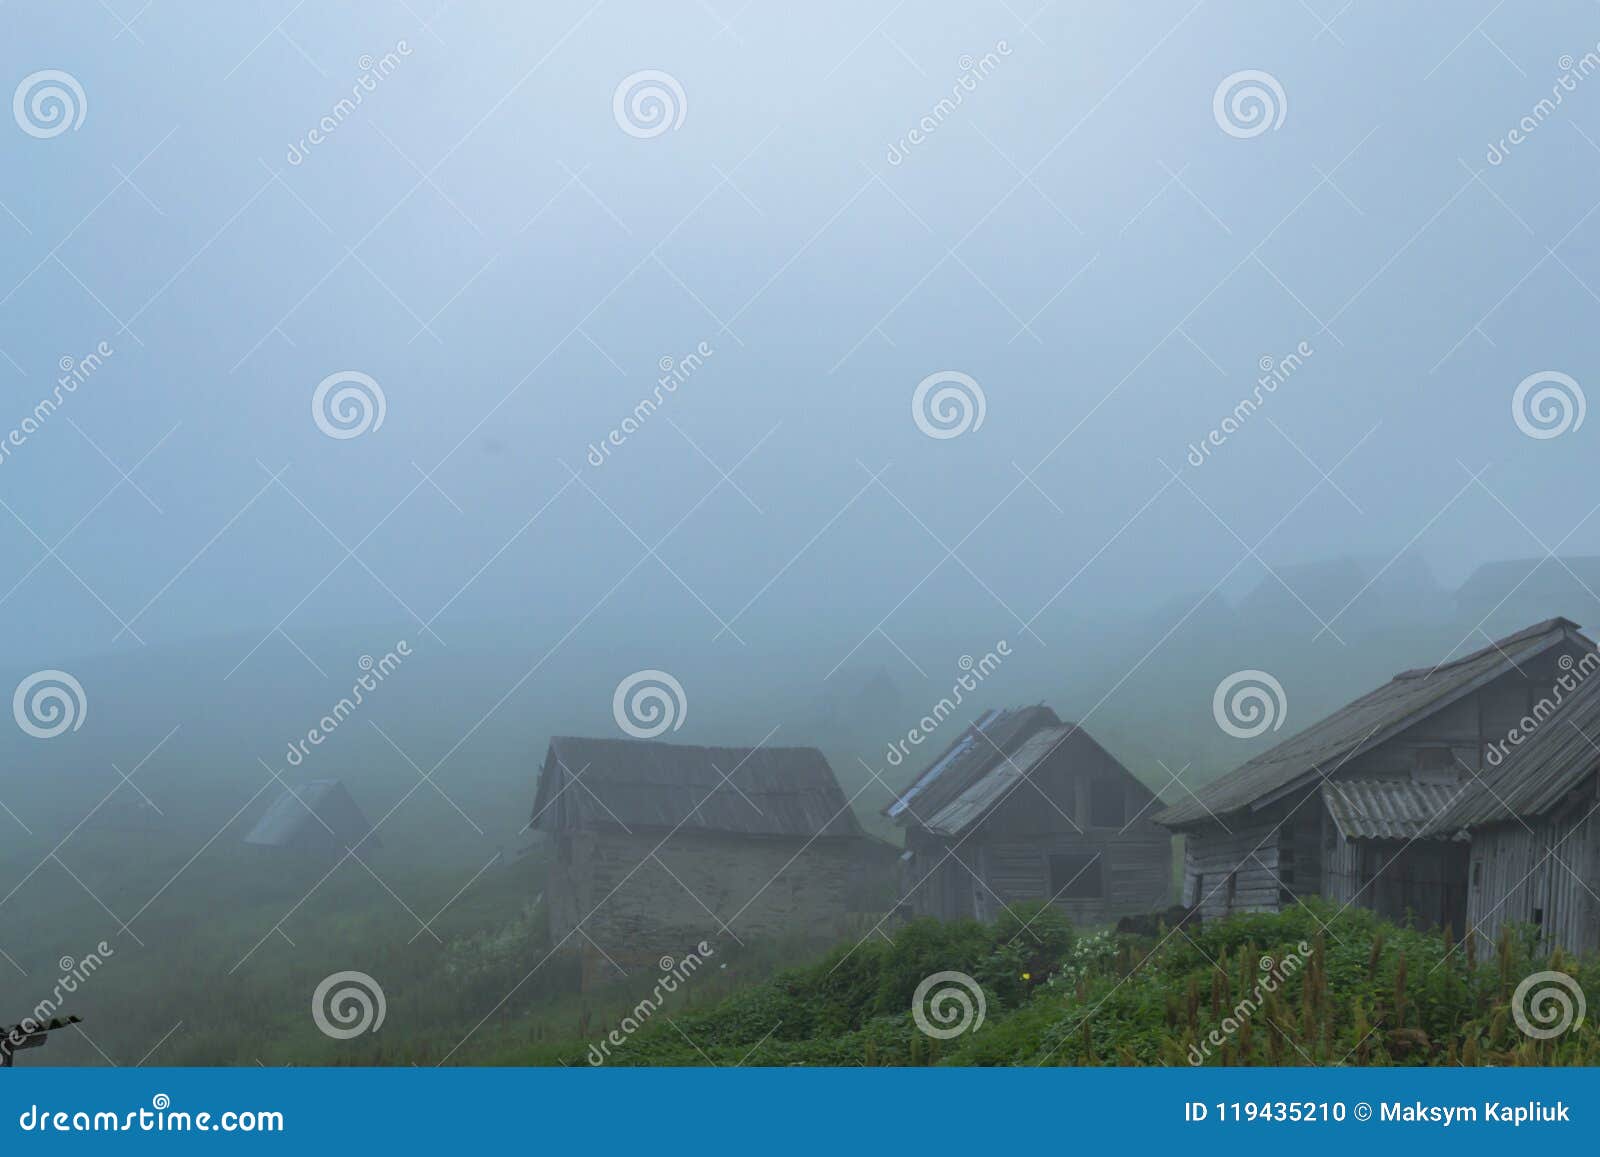 Abandoned Mountain Village in Foggy Weather Stock Photo - Image of ...